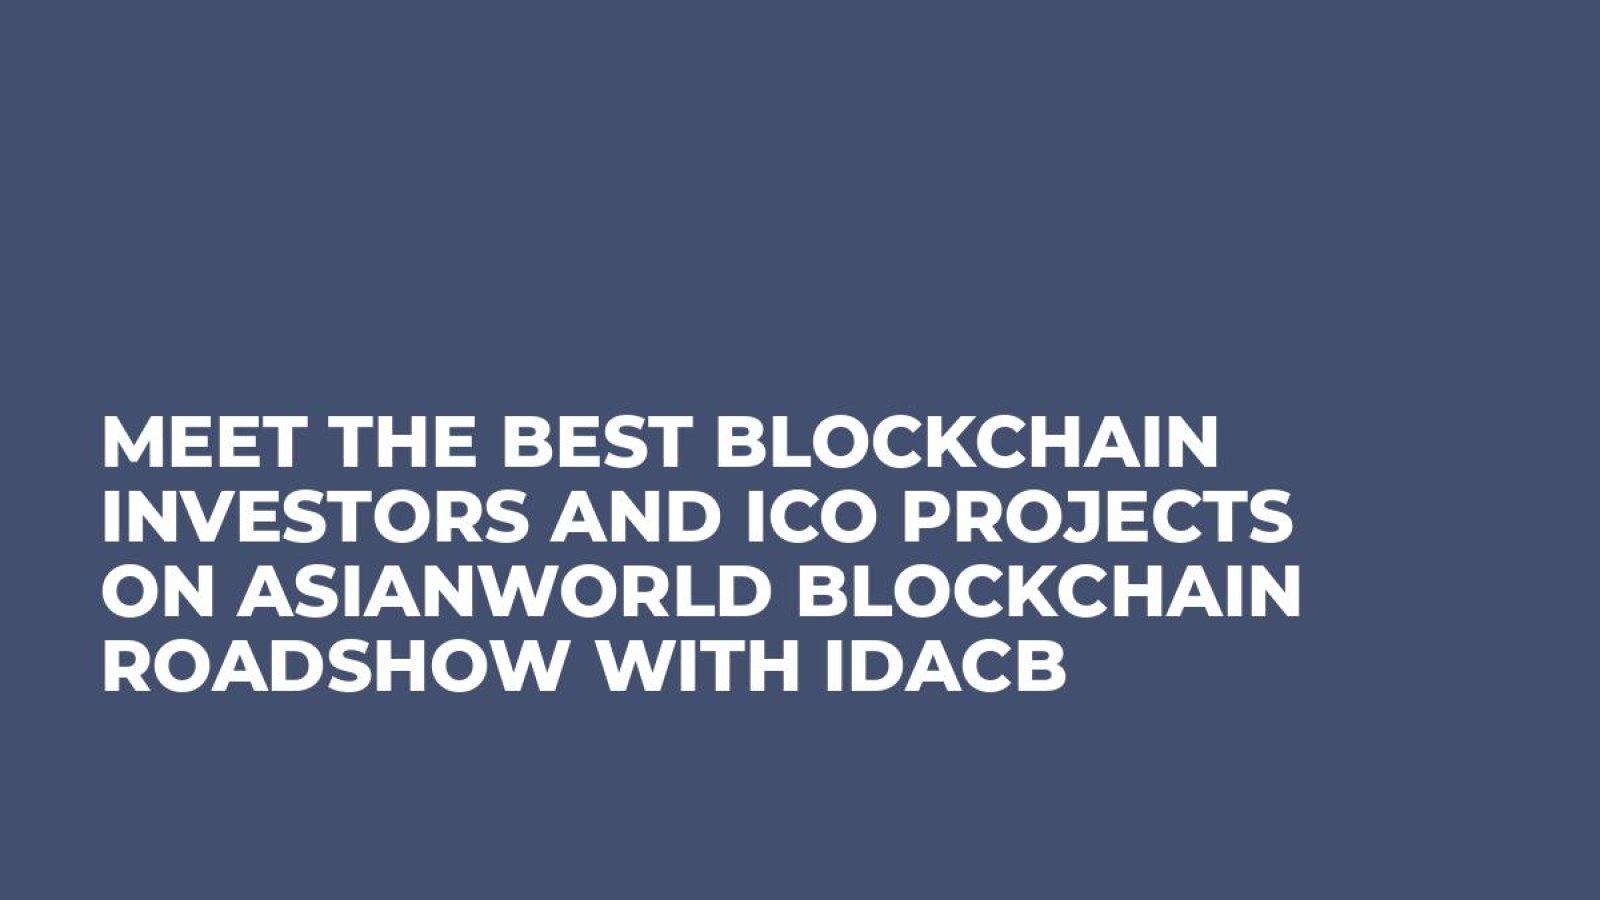 Meet the best Blockchain Investors and ICO projects on Asianworld Blockchain Roadshow with IDACB